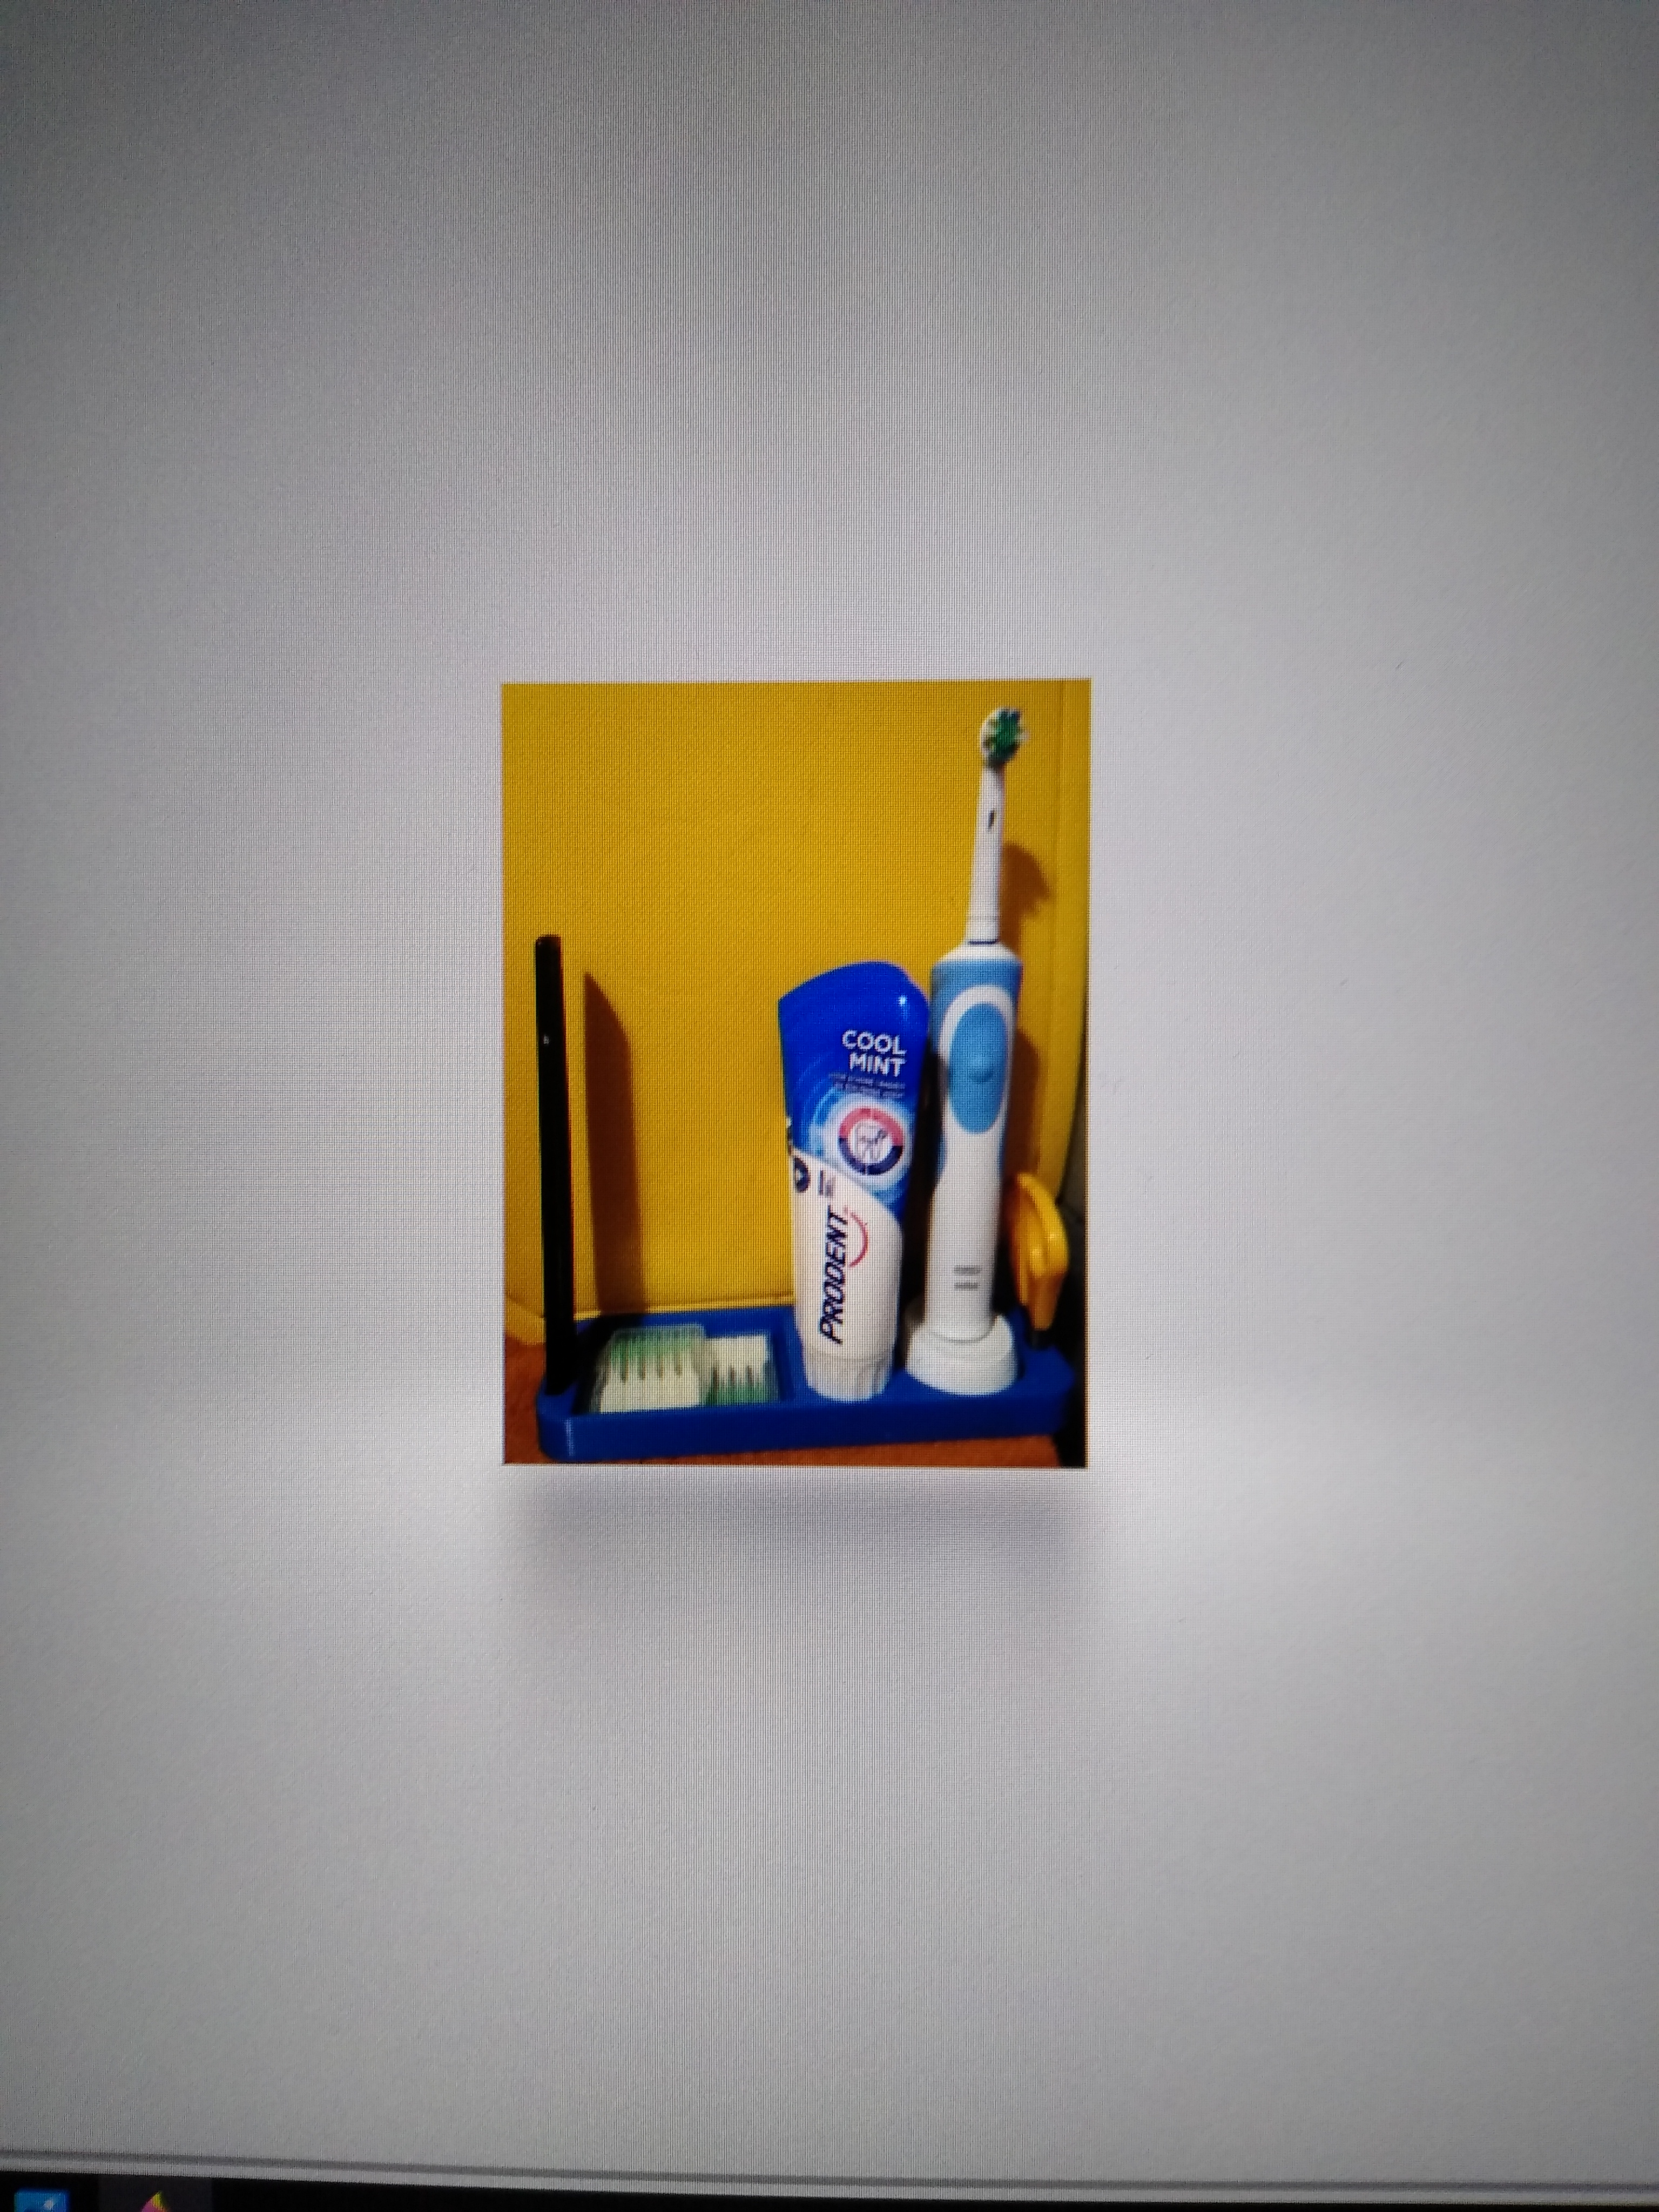 Toothbrush caddy